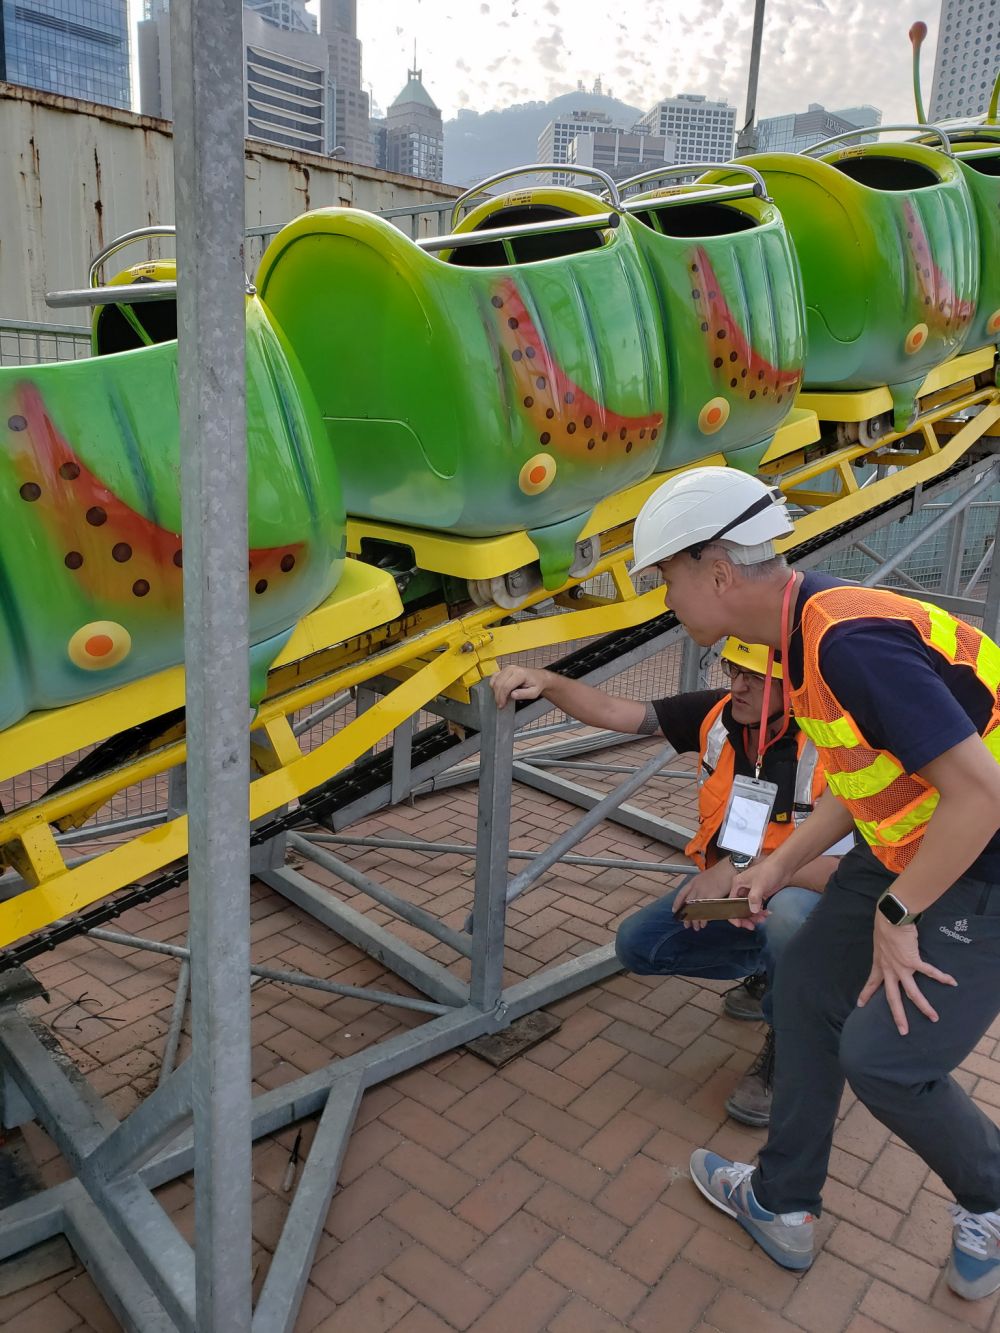 A colleague of the EMSD is overseeing the non-destructive test of the amusement ride by monitoring the surveyors on conducting the tests on critical welds in order to ensure that the rides can bear the sress and loading.